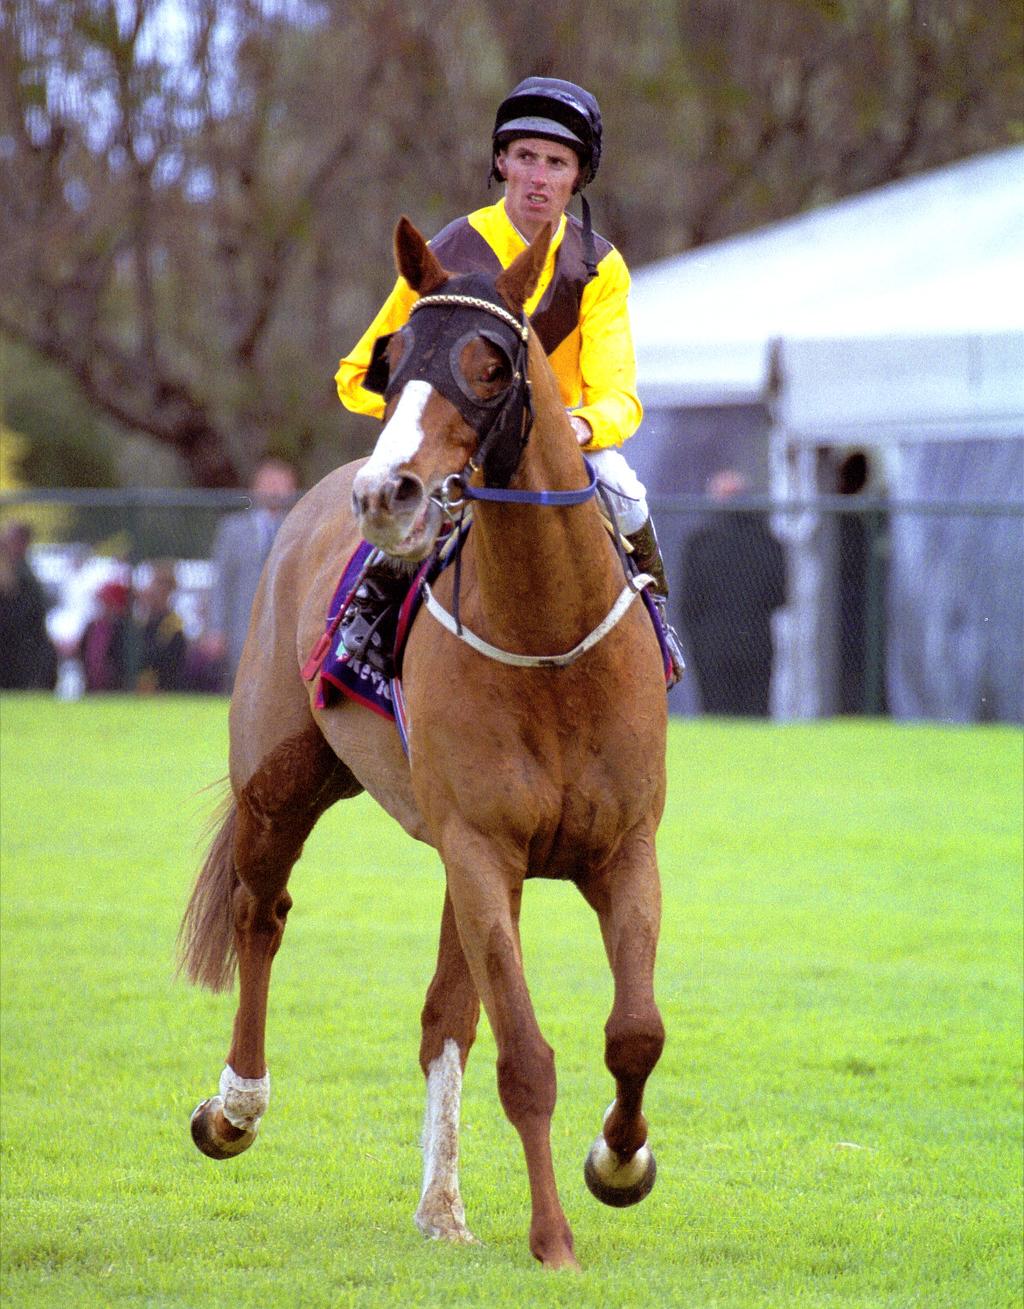 MEMORY LANE Savage Attack Chestnut gelding by Made of Gold ex Stylish Victory Owners: Mr M S Minervini, Mr P F Lemm, Mr B D Woodhouse, Miss G M Martin Race Record: 62 starts - 9 wins - 6 seconds - 12